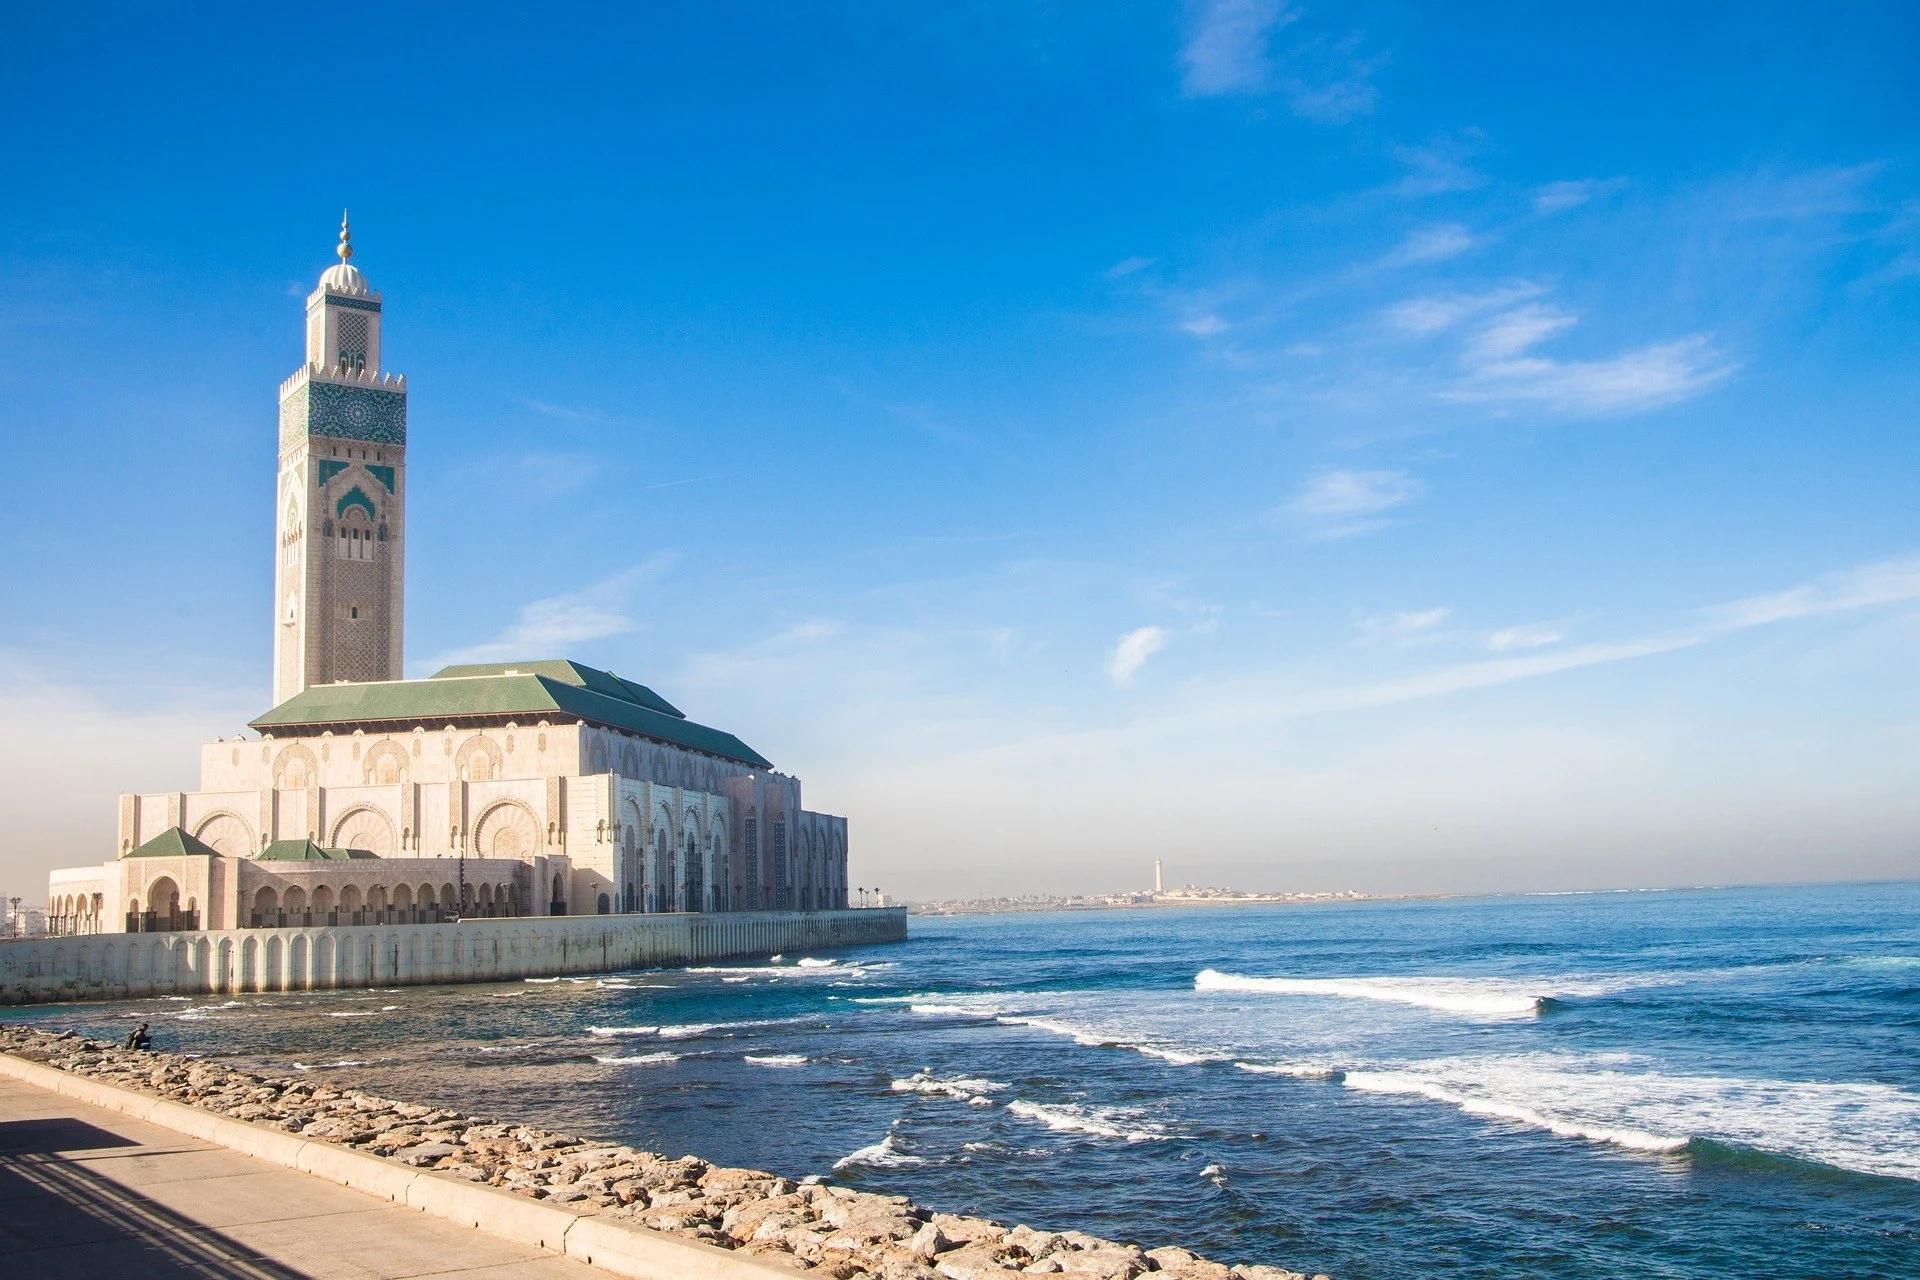 Hassan II Mosque by the sea in Casablanca, with its tall minaret against a clear blue sky.